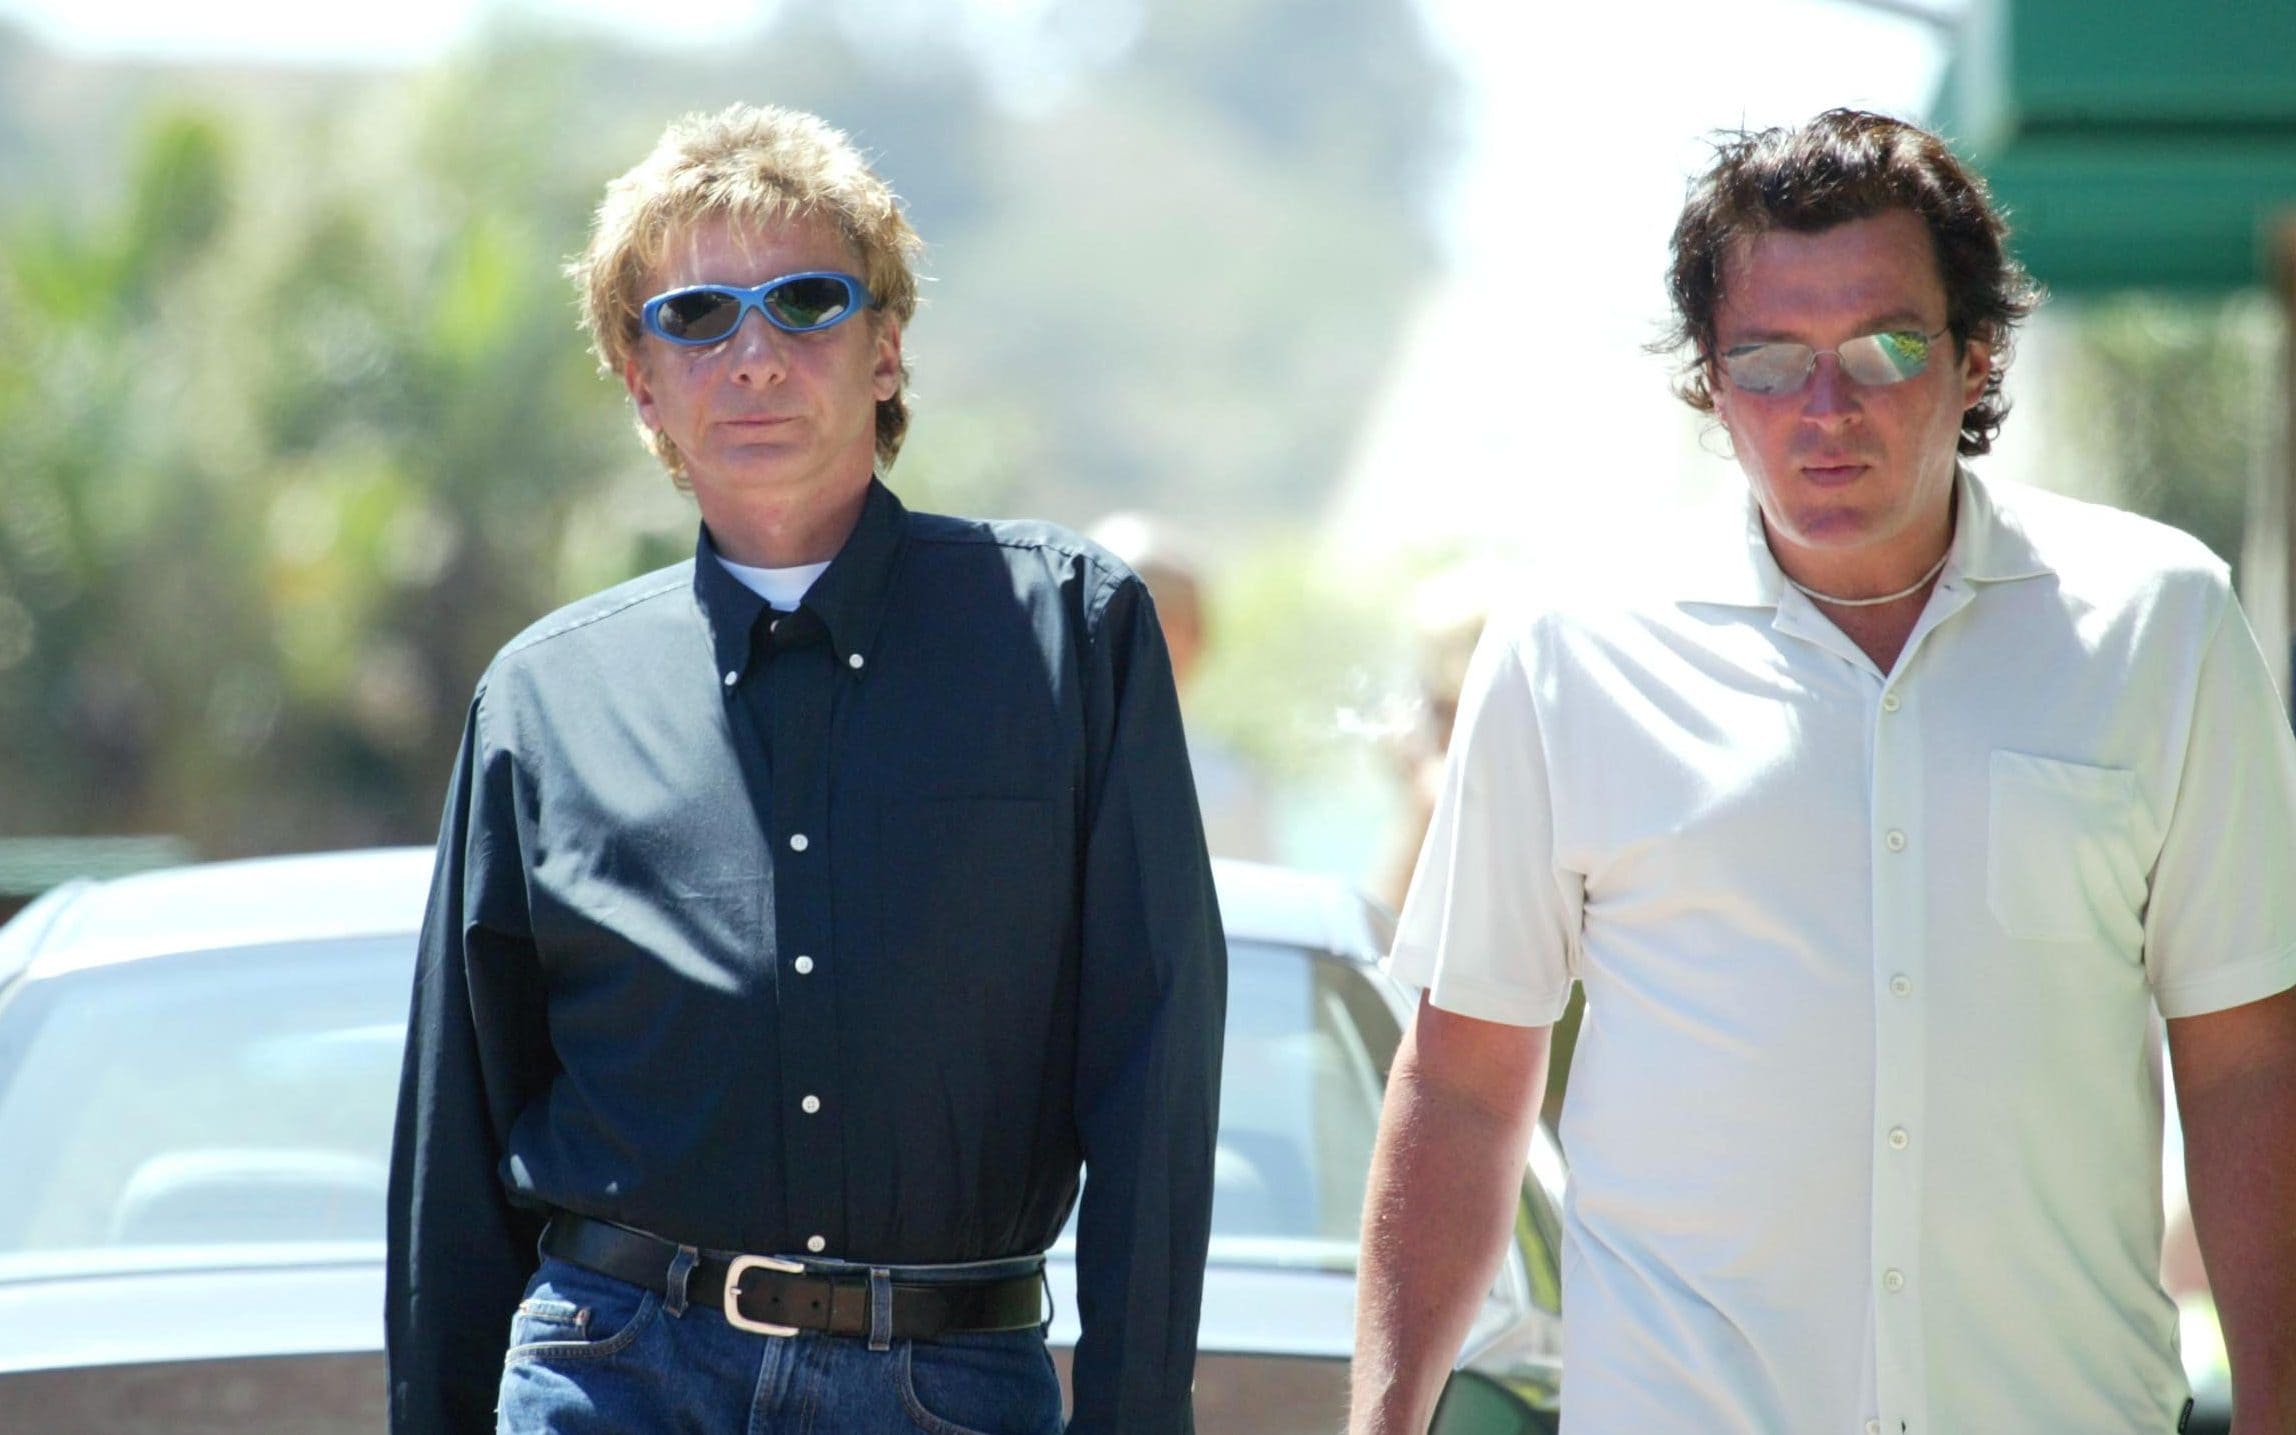 Barry Manilow and Garry Kief in 2003 - Credit: Rex Features